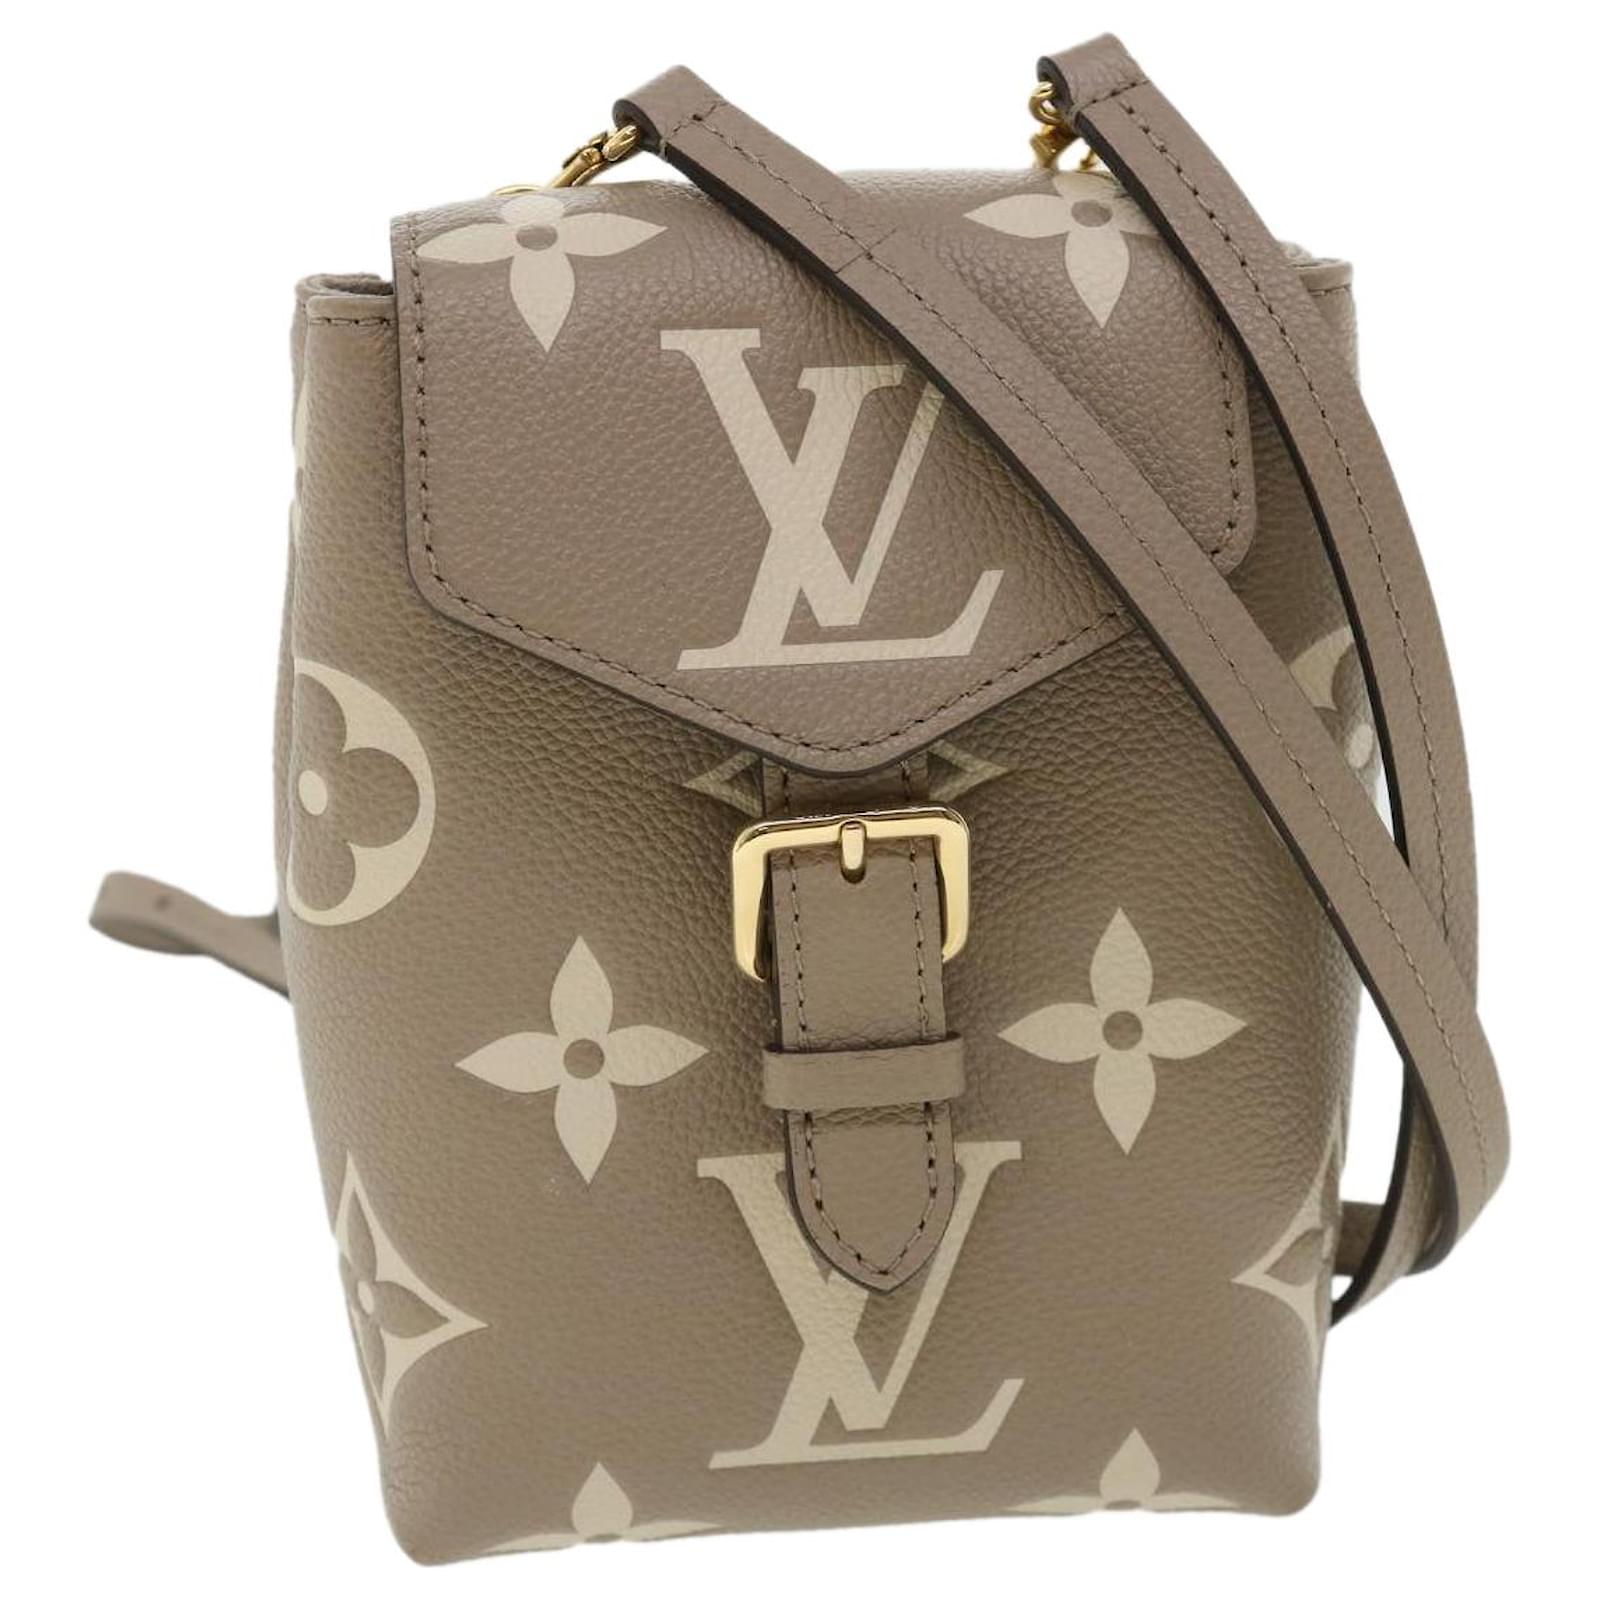 Louis Vuitton On the Go Beige Puffer Bag, New in Dustbag